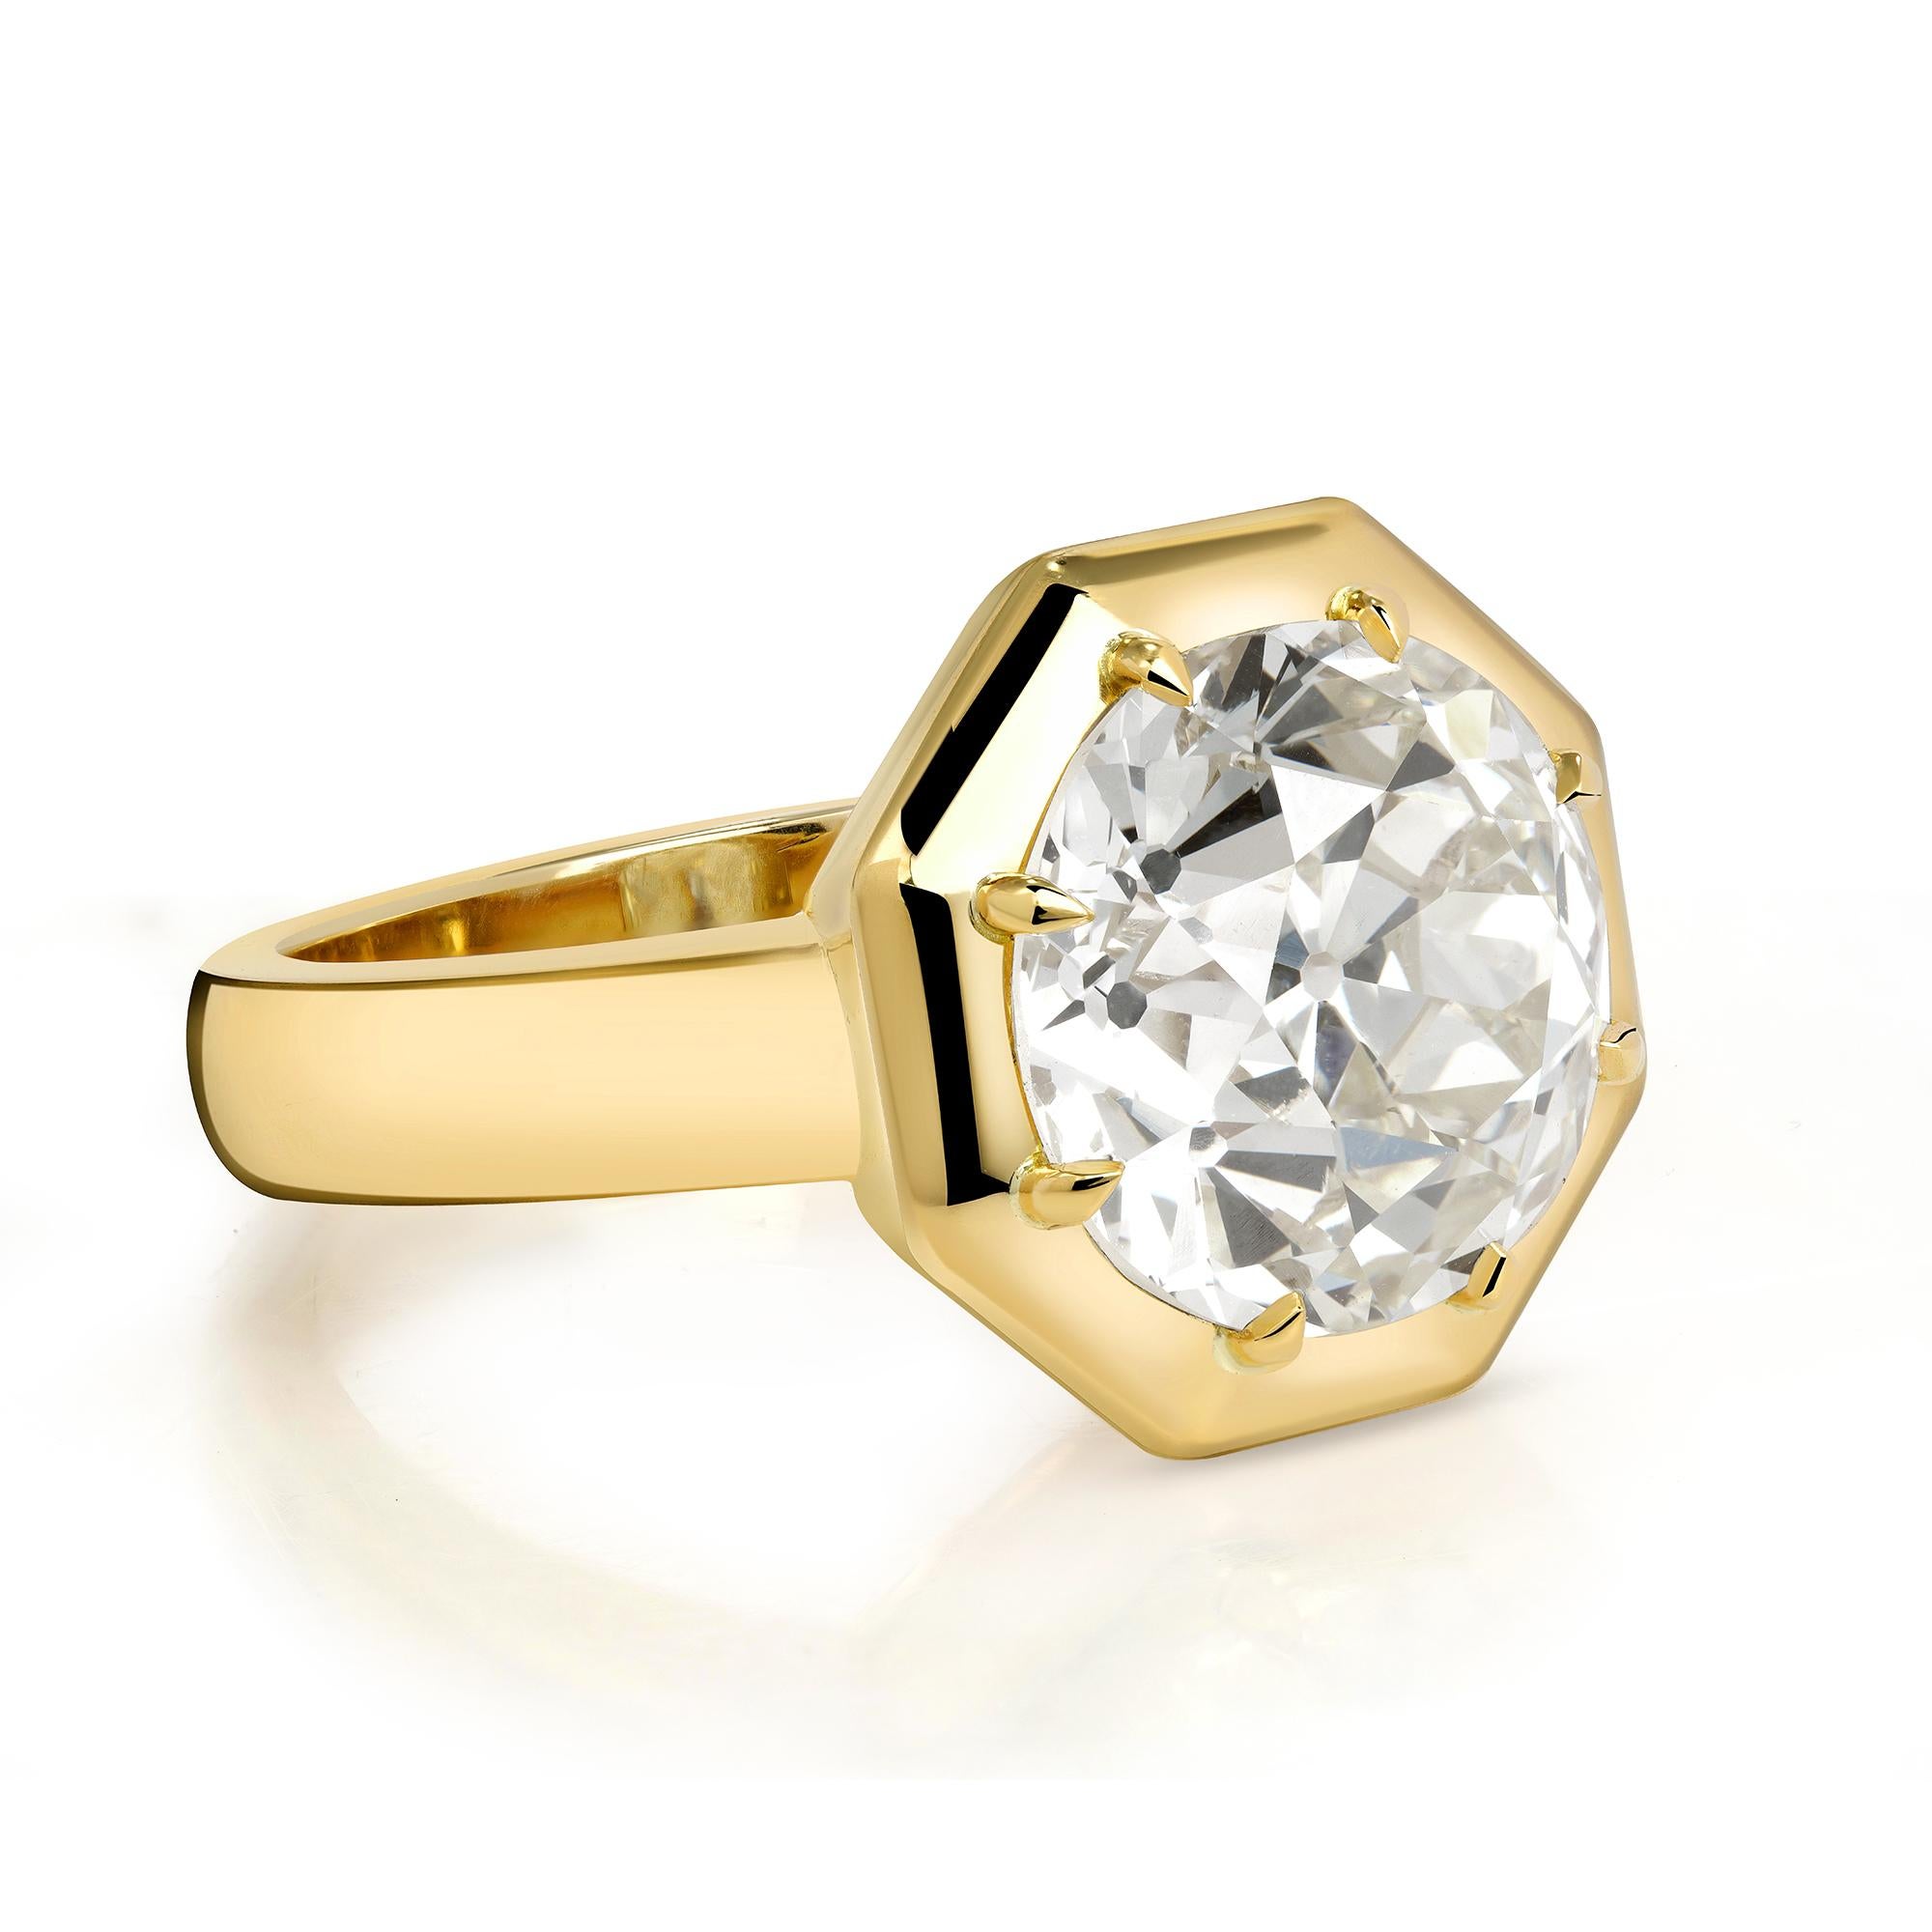 5.02ct M/VS1 GIA certified old European cut diamond prong set in a handcrafted 18K yellow gold mounting.